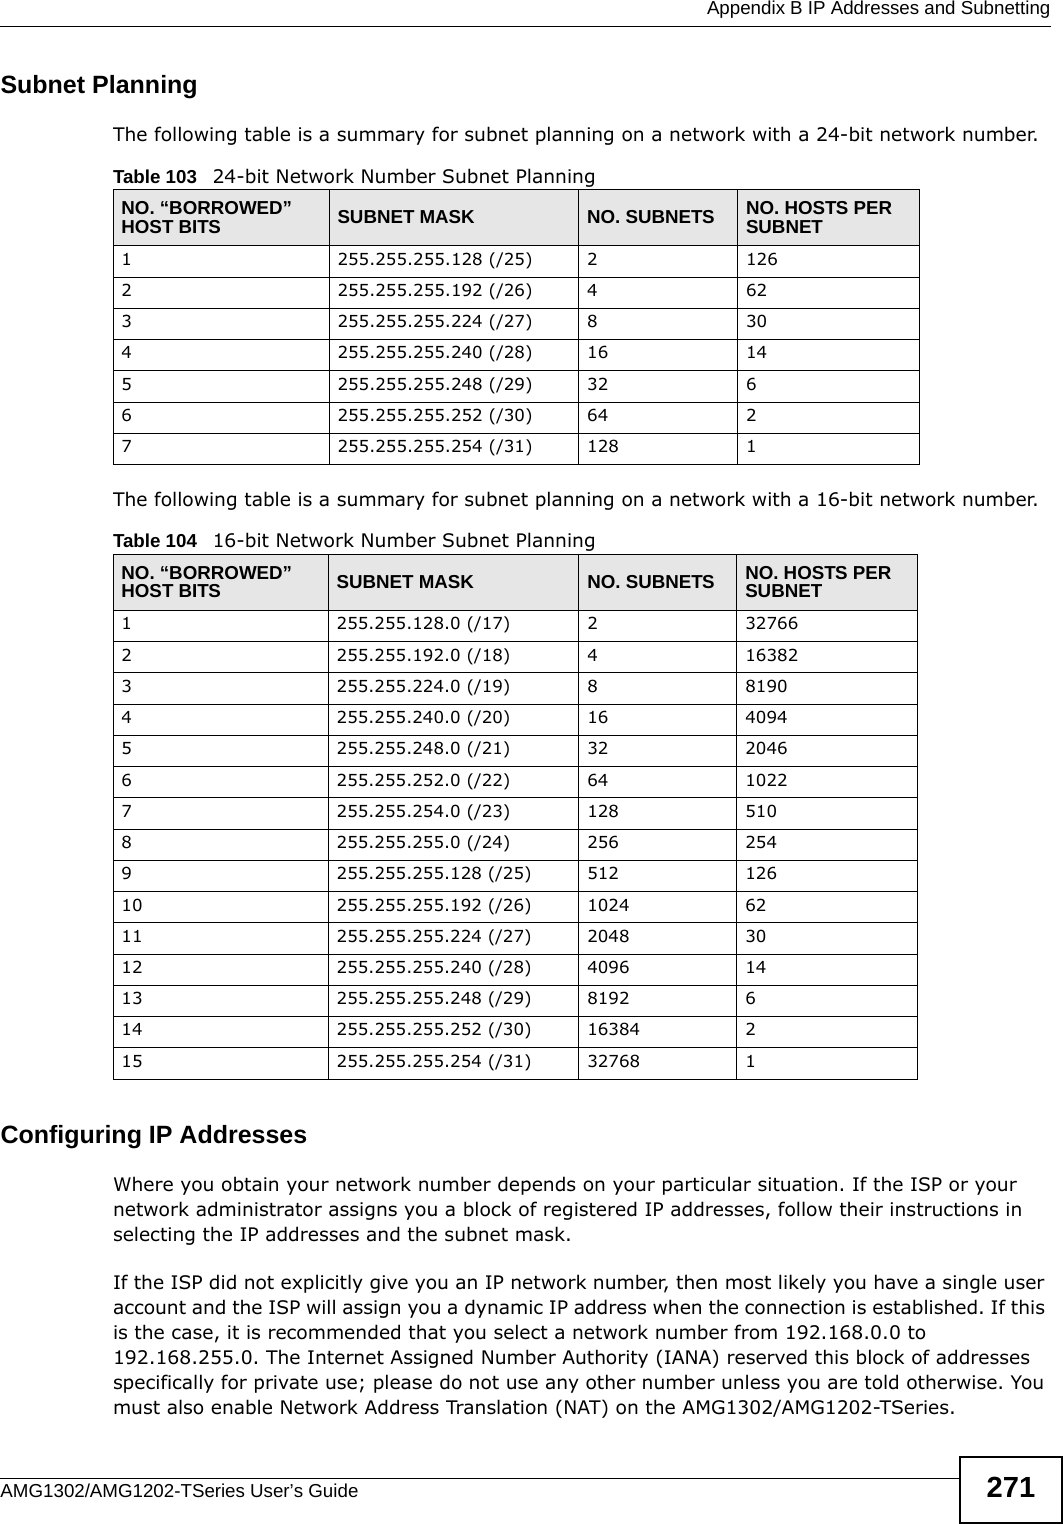  Appendix B IP Addresses and SubnettingAMG1302/AMG1202-TSeries User’s Guide 271Subnet PlanningThe following table is a summary for subnet planning on a network with a 24-bit network number.The following table is a summary for subnet planning on a network with a 16-bit network number. Configuring IP AddressesWhere you obtain your network number depends on your particular situation. If the ISP or your network administrator assigns you a block of registered IP addresses, follow their instructions in selecting the IP addresses and the subnet mask.If the ISP did not explicitly give you an IP network number, then most likely you have a single user account and the ISP will assign you a dynamic IP address when the connection is established. If this is the case, it is recommended that you select a network number from 192.168.0.0 to 192.168.255.0. The Internet Assigned Number Authority (IANA) reserved this block of addresses specifically for private use; please do not use any other number unless you are told otherwise. You must also enable Network Address Translation (NAT) on the AMG1302/AMG1202-TSeries. Table 103   24-bit Network Number Subnet PlanningNO. “BORROWED” HOST BITS SUBNET MASK NO. SUBNETS NO. HOSTS PER SUBNET1255.255.255.128 (/25) 21262255.255.255.192 (/26) 4623255.255.255.224 (/27) 8304255.255.255.240 (/28) 16 145255.255.255.248 (/29) 32 66255.255.255.252 (/30) 64 27255.255.255.254 (/31) 128 1Table 104   16-bit Network Number Subnet PlanningNO. “BORROWED” HOST BITS SUBNET MASK NO. SUBNETS NO. HOSTS PER SUBNET1255.255.128.0 (/17) 2327662255.255.192.0 (/18) 4163823255.255.224.0 (/19) 881904255.255.240.0 (/20) 16 40945255.255.248.0 (/21) 32 20466255.255.252.0 (/22) 64 10227255.255.254.0 (/23) 128 5108255.255.255.0 (/24) 256 2549255.255.255.128 (/25) 512 12610 255.255.255.192 (/26) 1024 6211 255.255.255.224 (/27) 2048 3012 255.255.255.240 (/28) 4096 1413 255.255.255.248 (/29) 8192 614 255.255.255.252 (/30) 16384 215 255.255.255.254 (/31) 32768 1